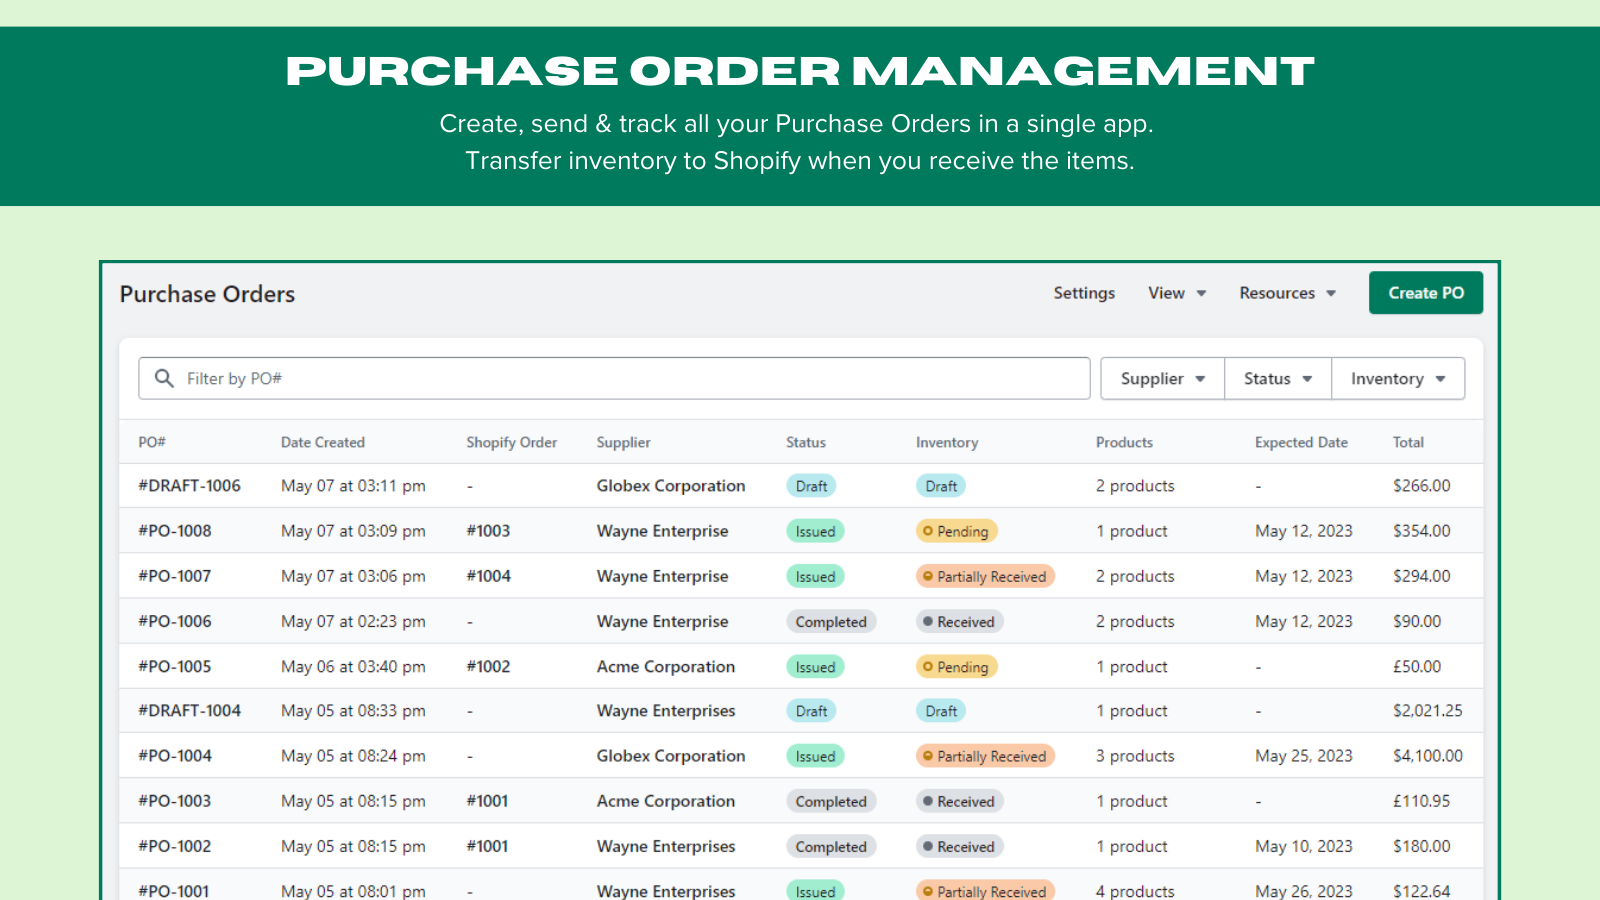 Track all your Purchase Orders easily in a single Shopify app.